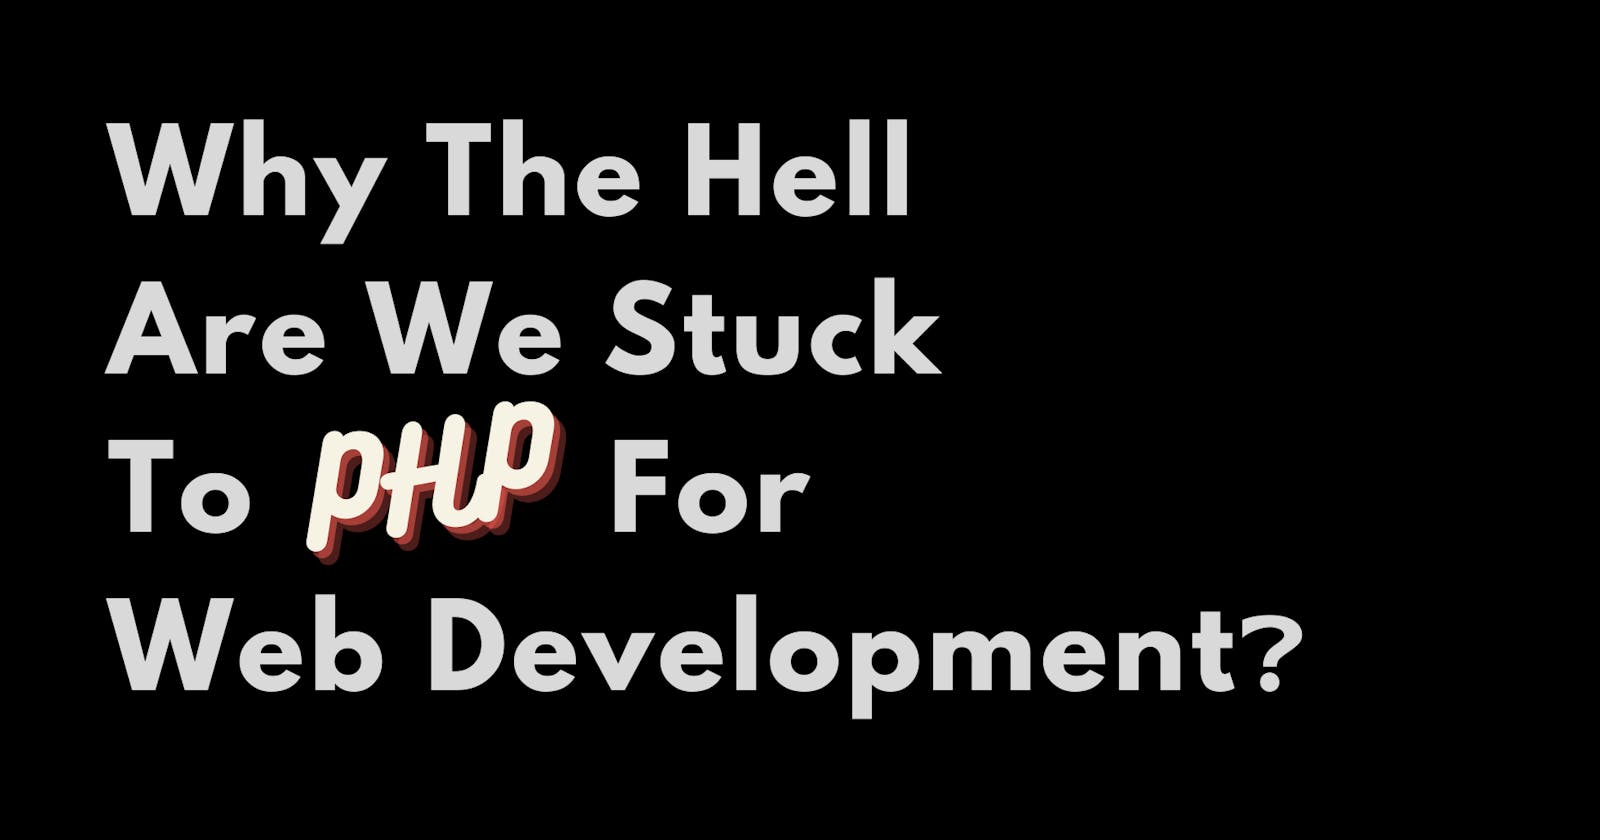 Why The Hell Are We Stuck To PHP For Web Development?